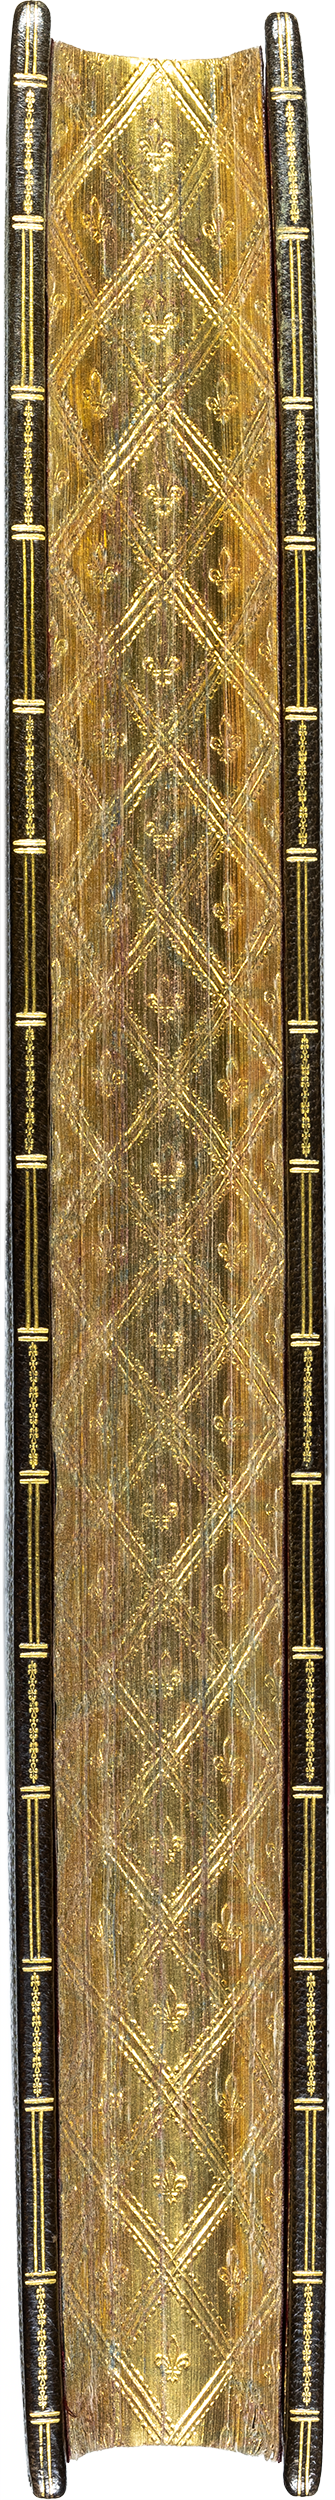 Montaigne-essais-1595-lortic-binding-reliure-olive-morocco-gilt-edge.png